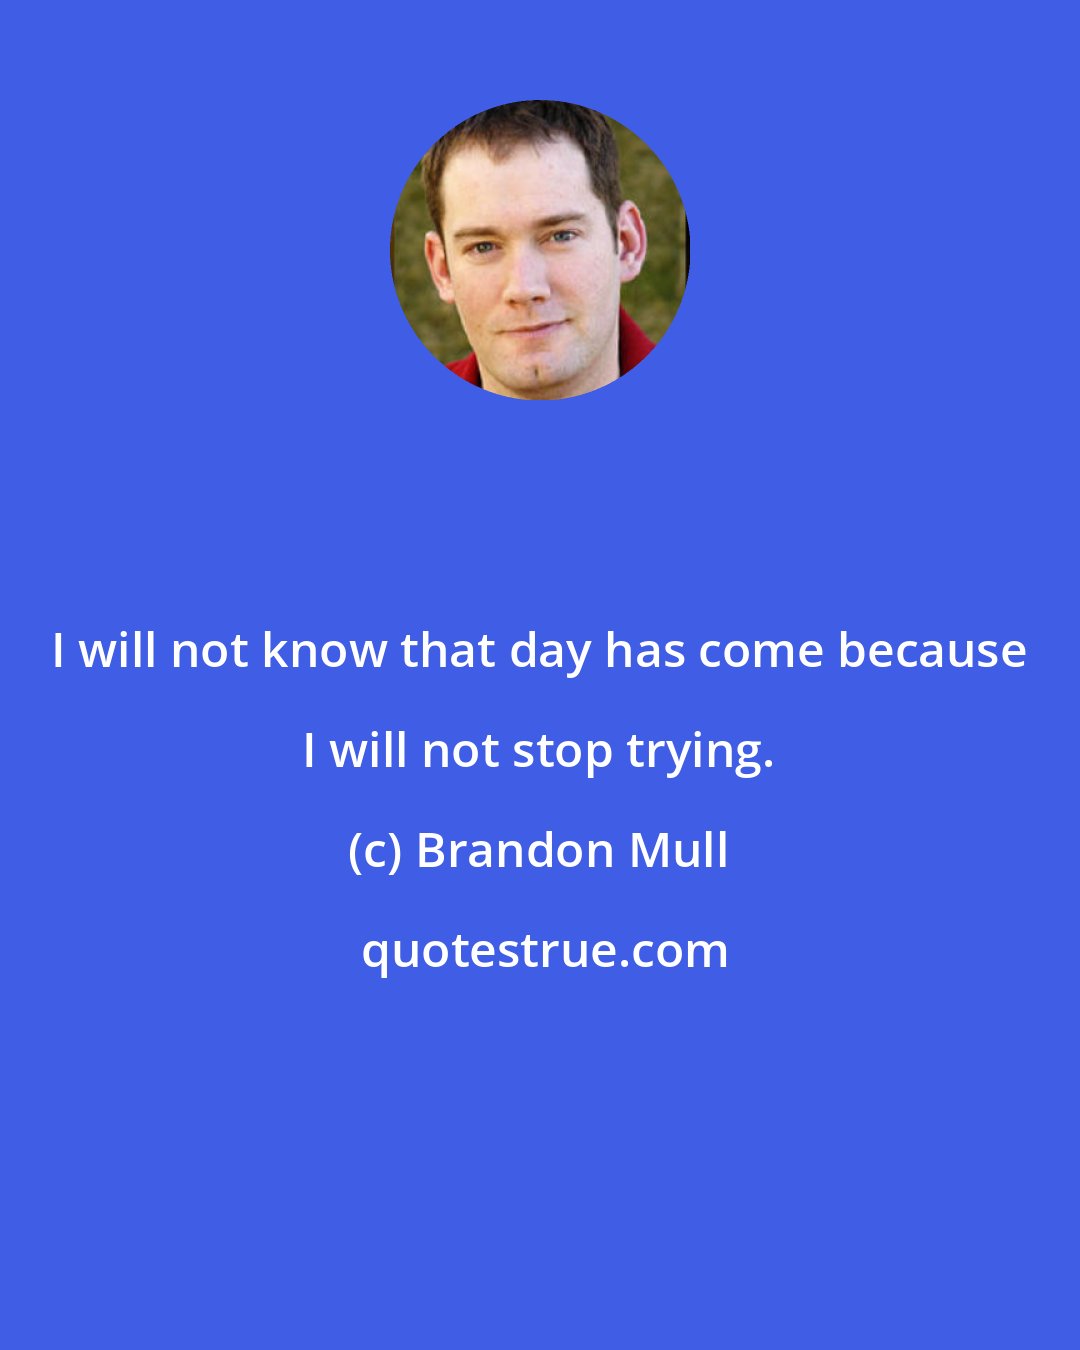 Brandon Mull: I will not know that day has come because I will not stop trying.